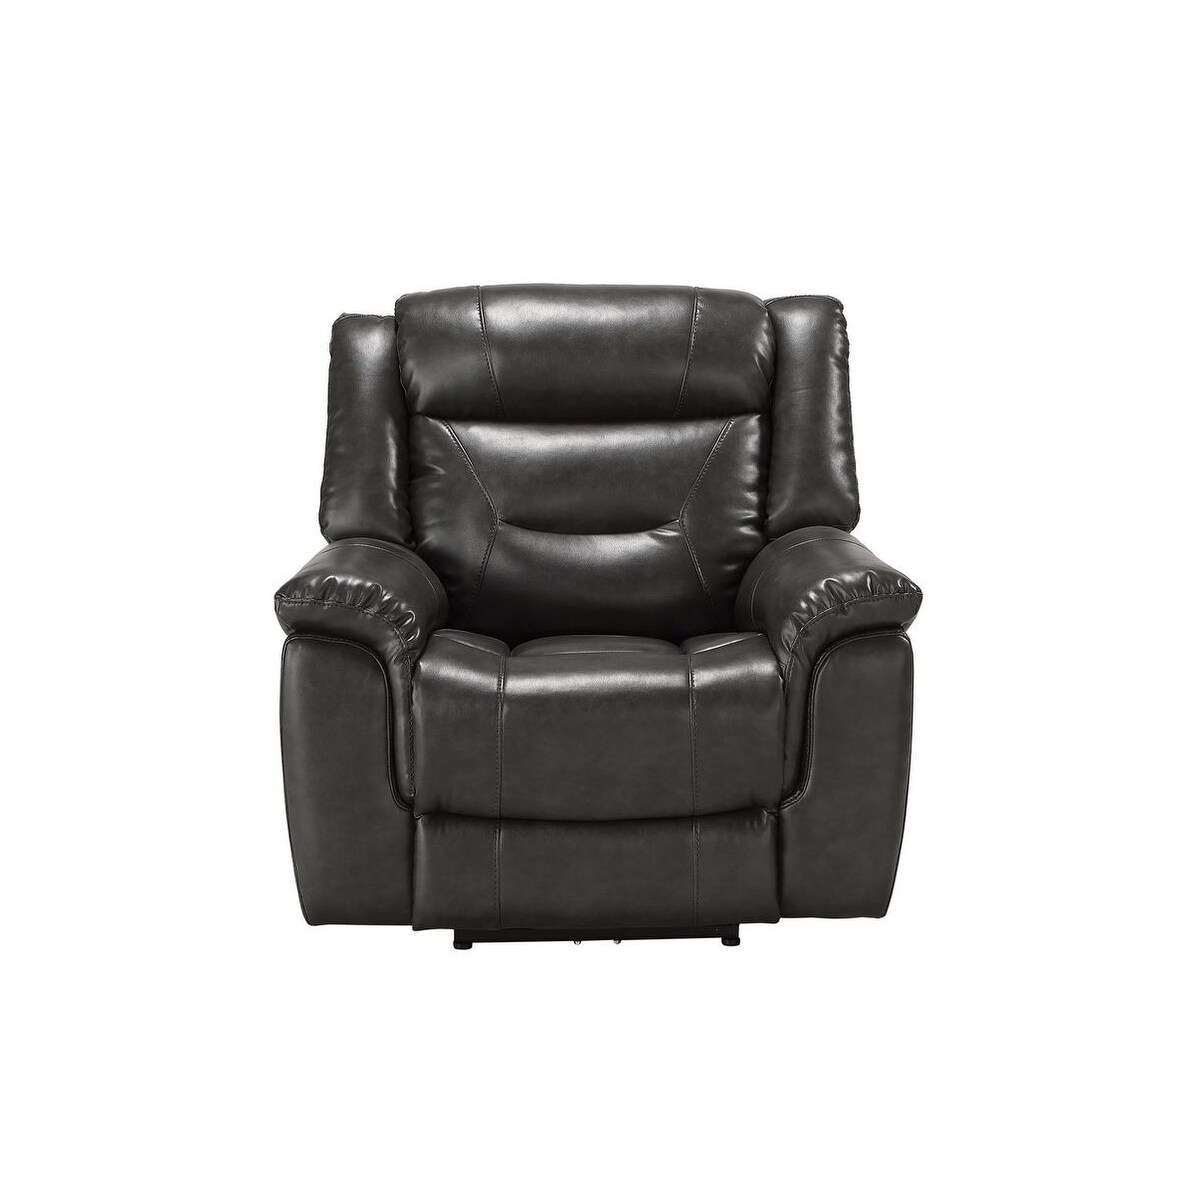 Motion Recliner w/ USB Port Rocking Chair Faux Leather Theater Seating, Gray